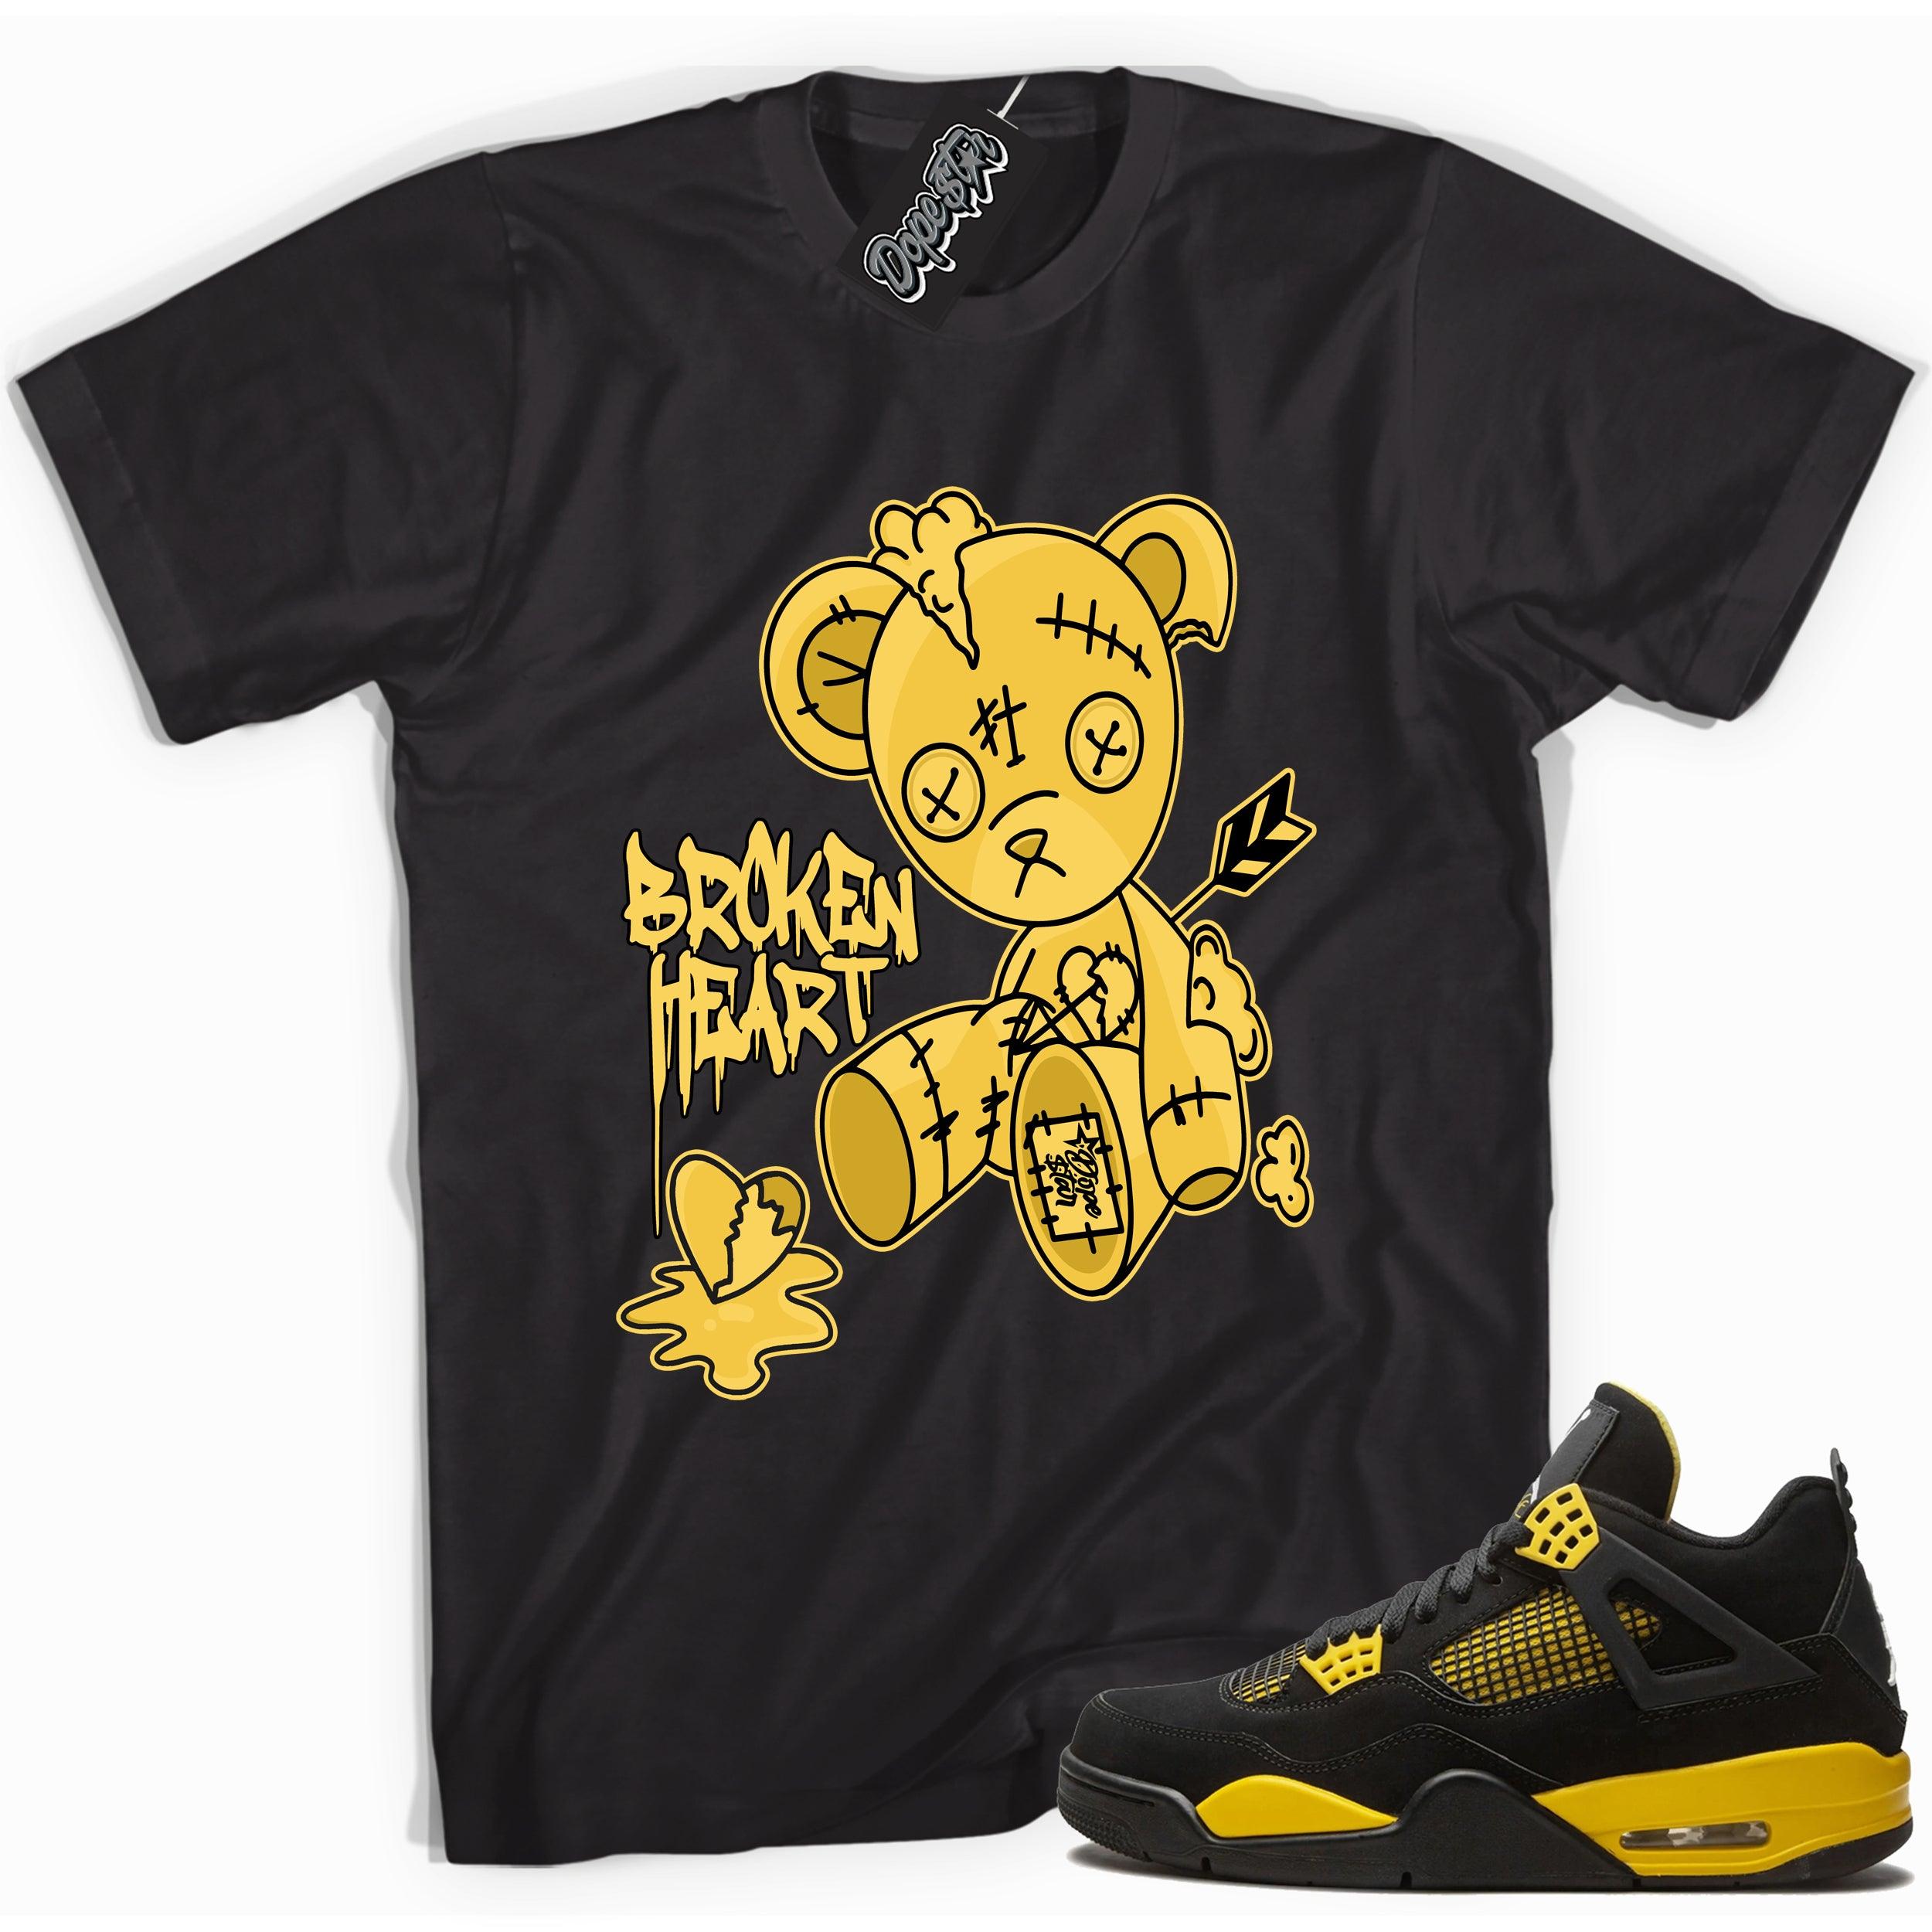 Cool black graphic tee with 'broken heart bear' print, that perfectly matches  Air Jordan 4 Thunder sneakers